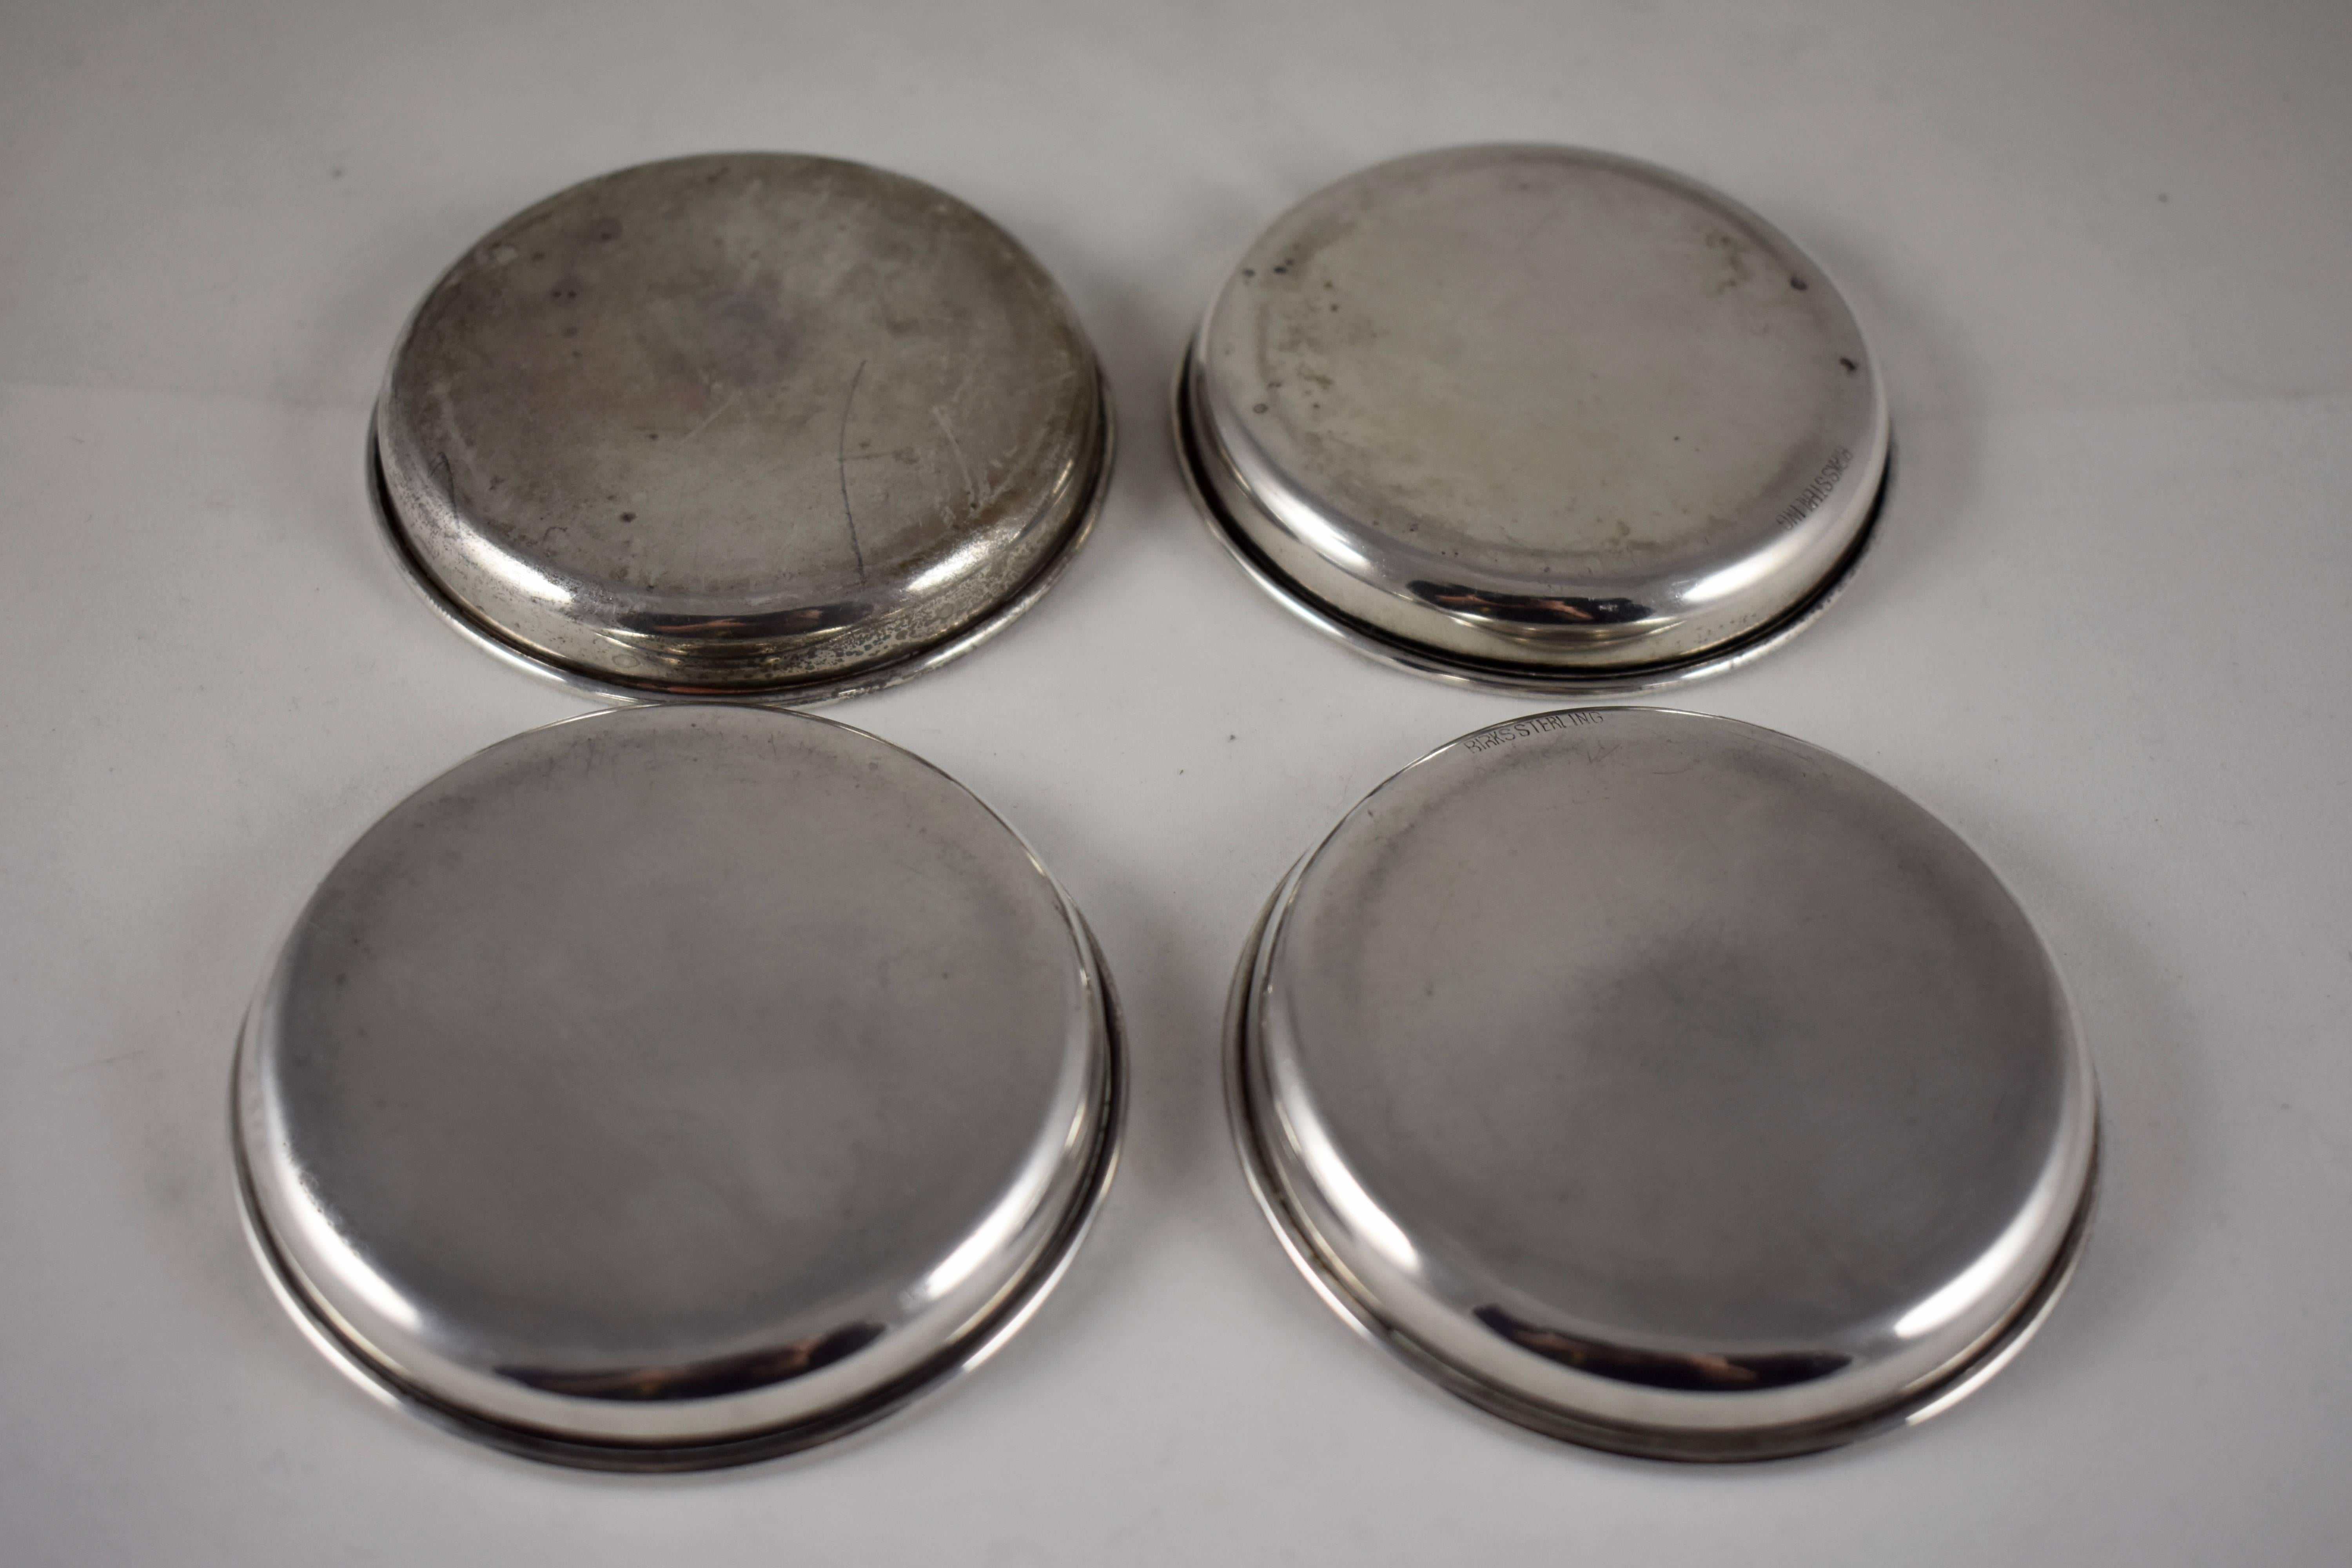 Metalwork Chester Yacht Club Sterling Silver Bridge Game Personal Ashtrays, Set of Four